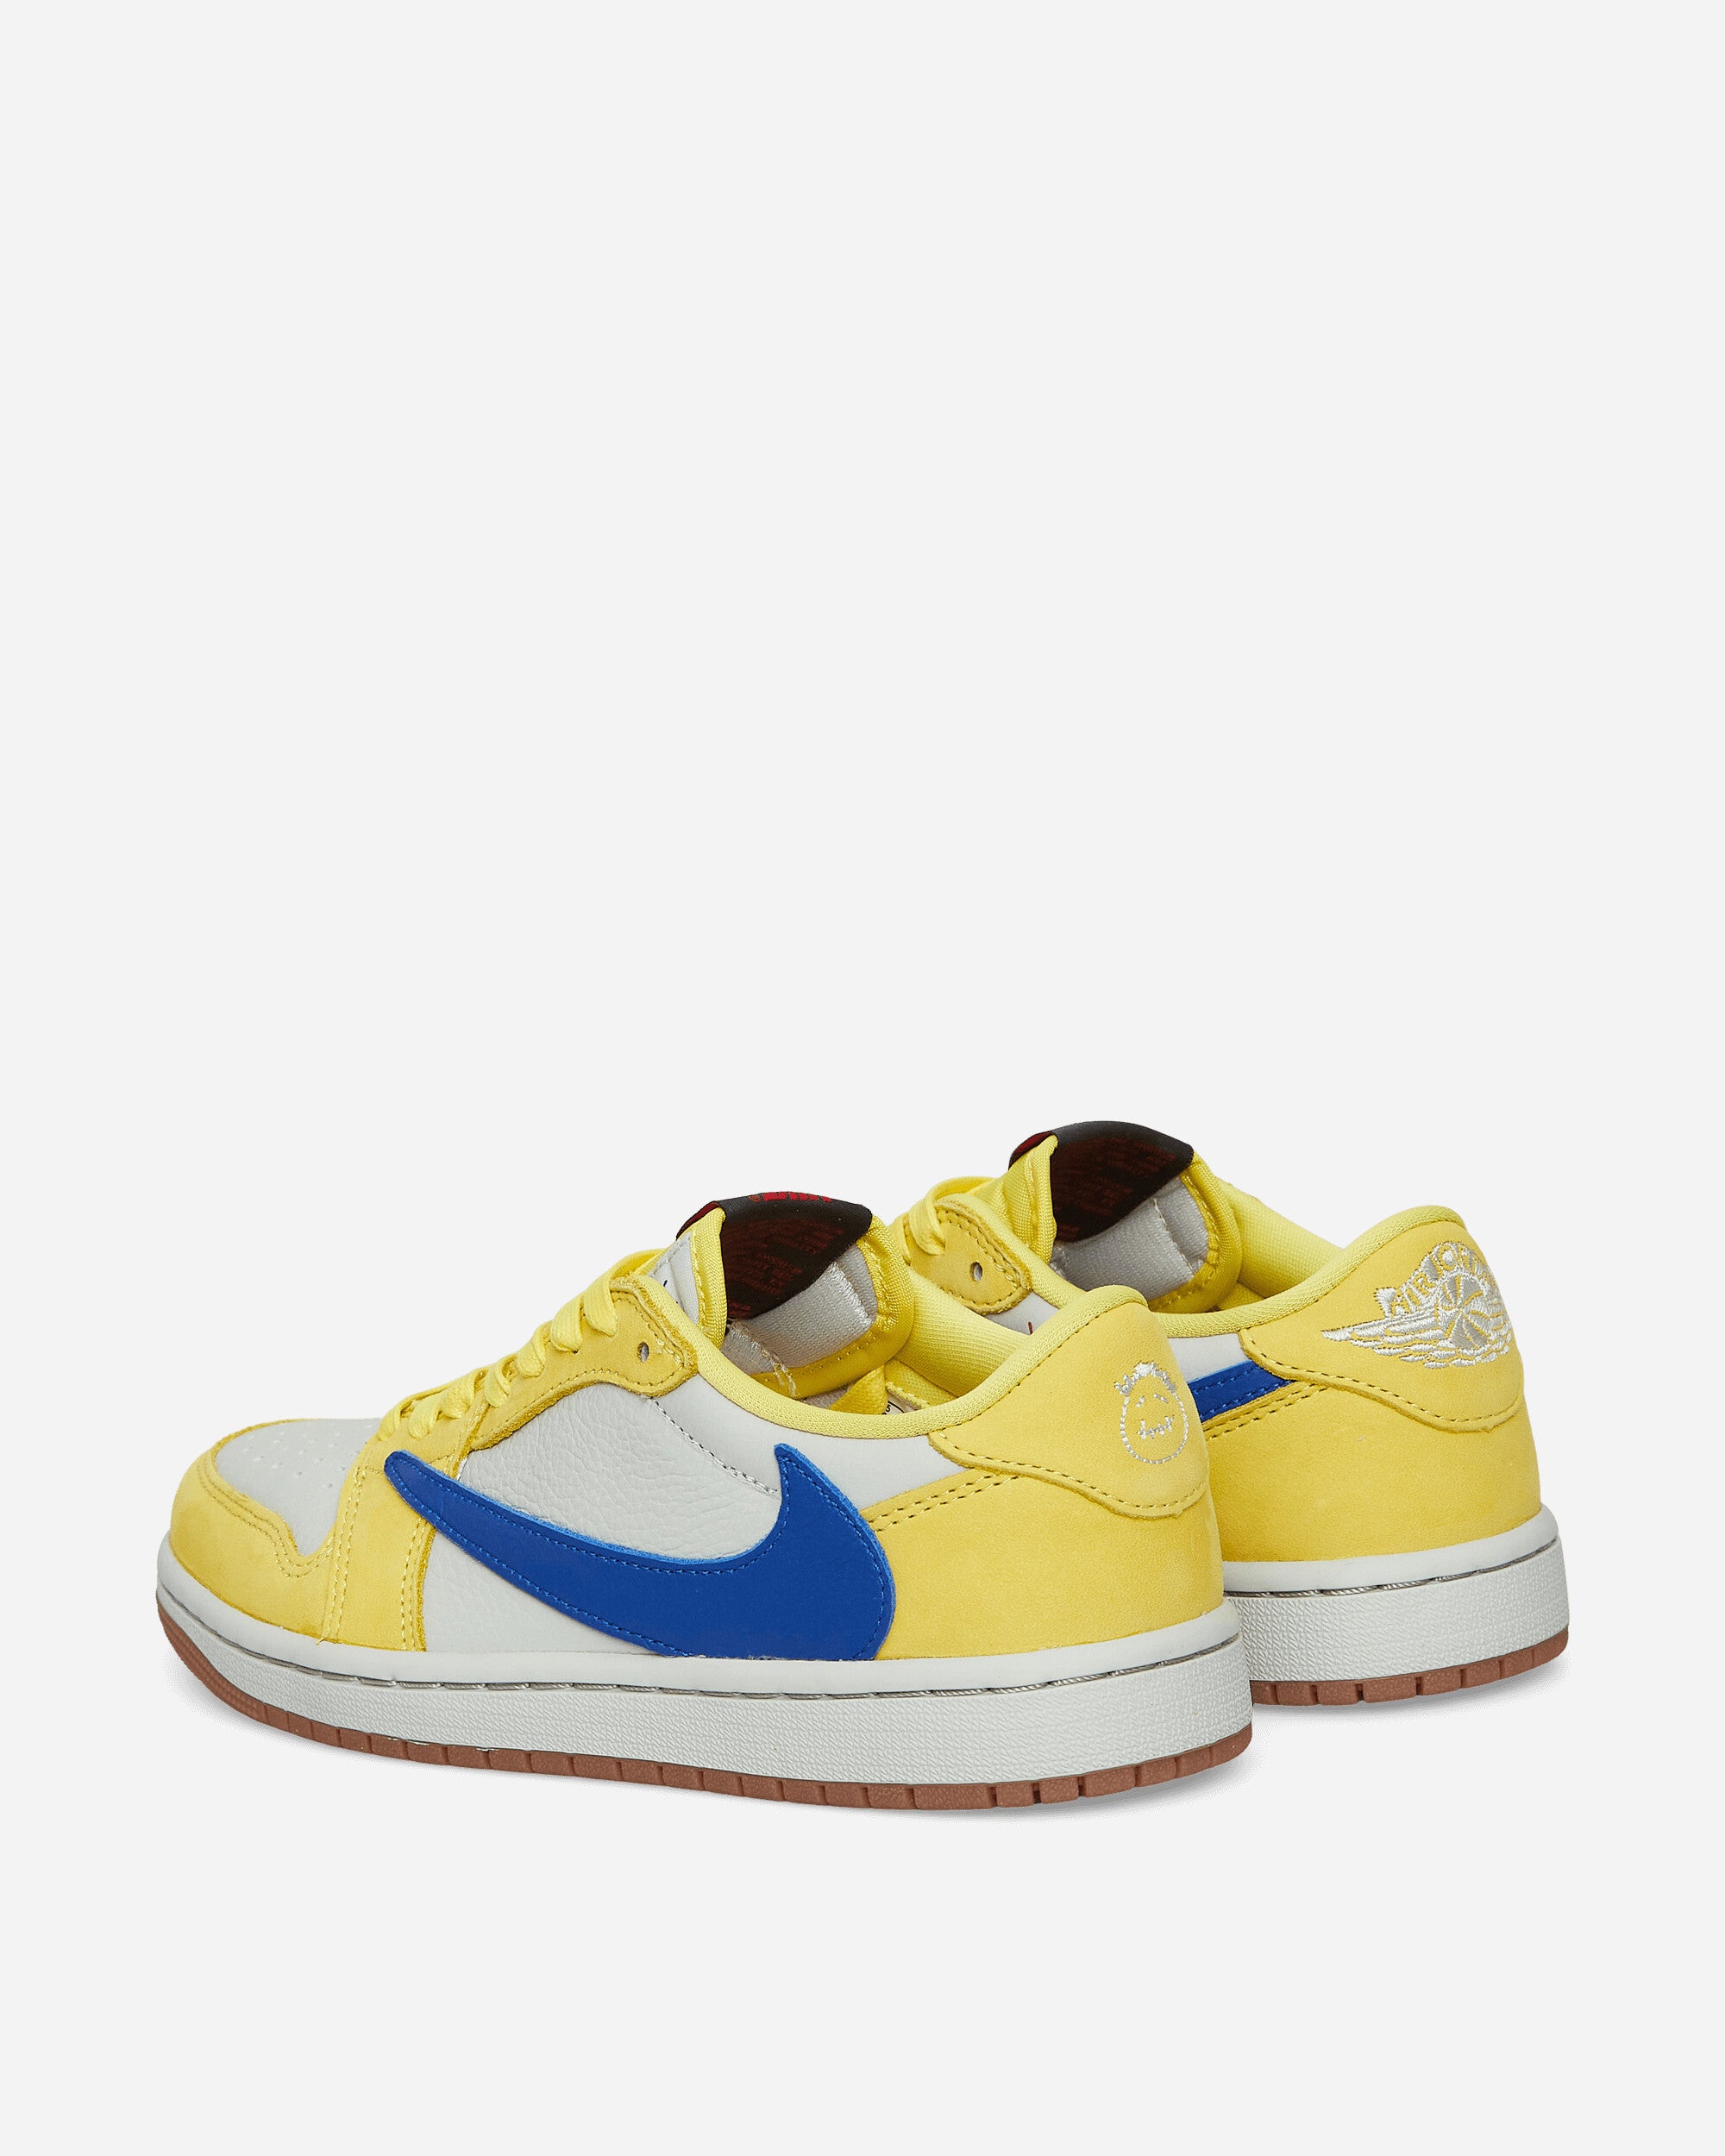 Nike Wmns Air Jordan 1 Low Og Sp Canary/Racer Blue/Silver Sneakers Low DZ4137-700